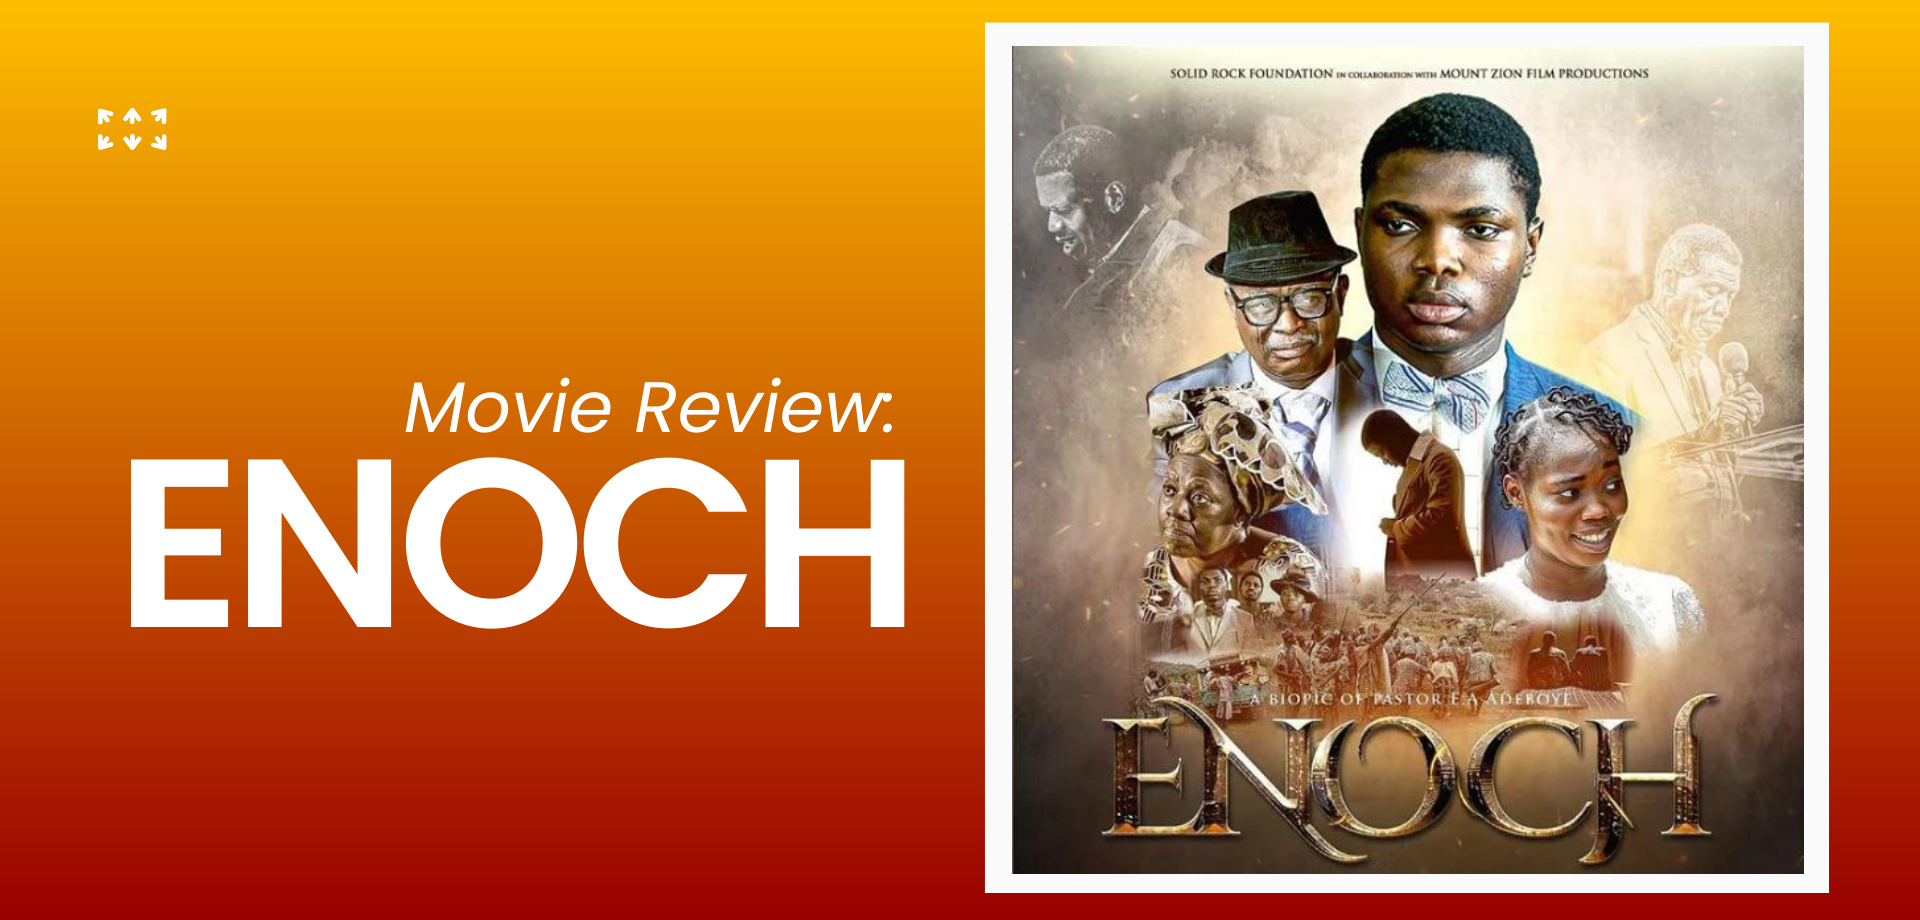 Enoch Movie Review: A Mount Zion Film Production